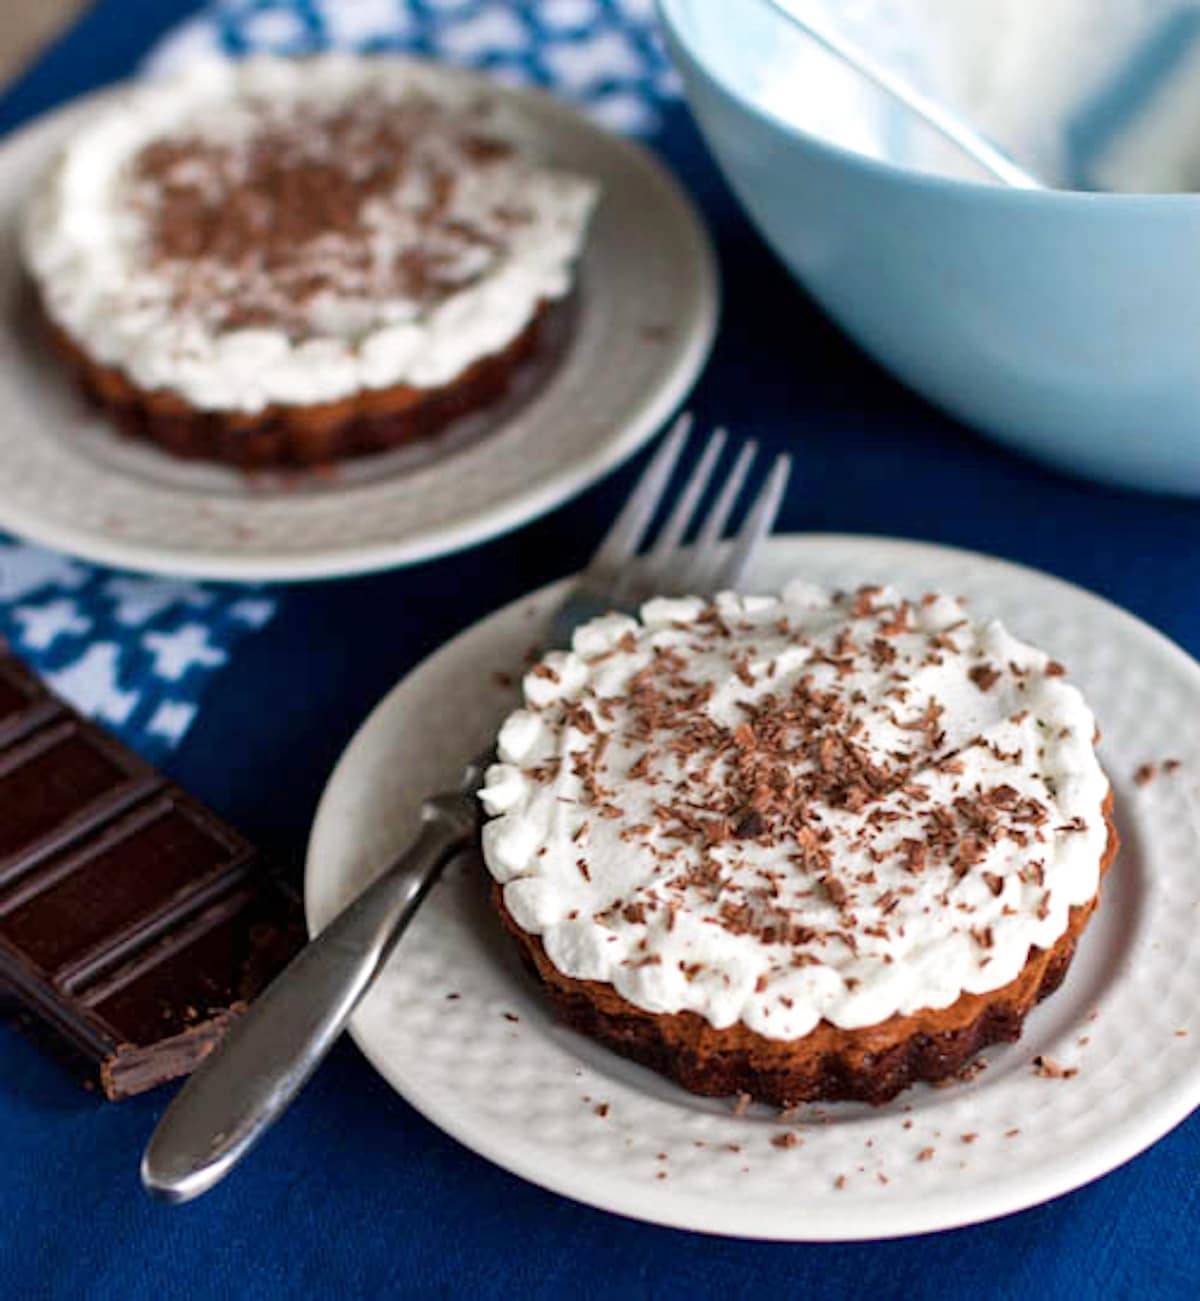 Two French silk brownie pies on white plates with a fork.